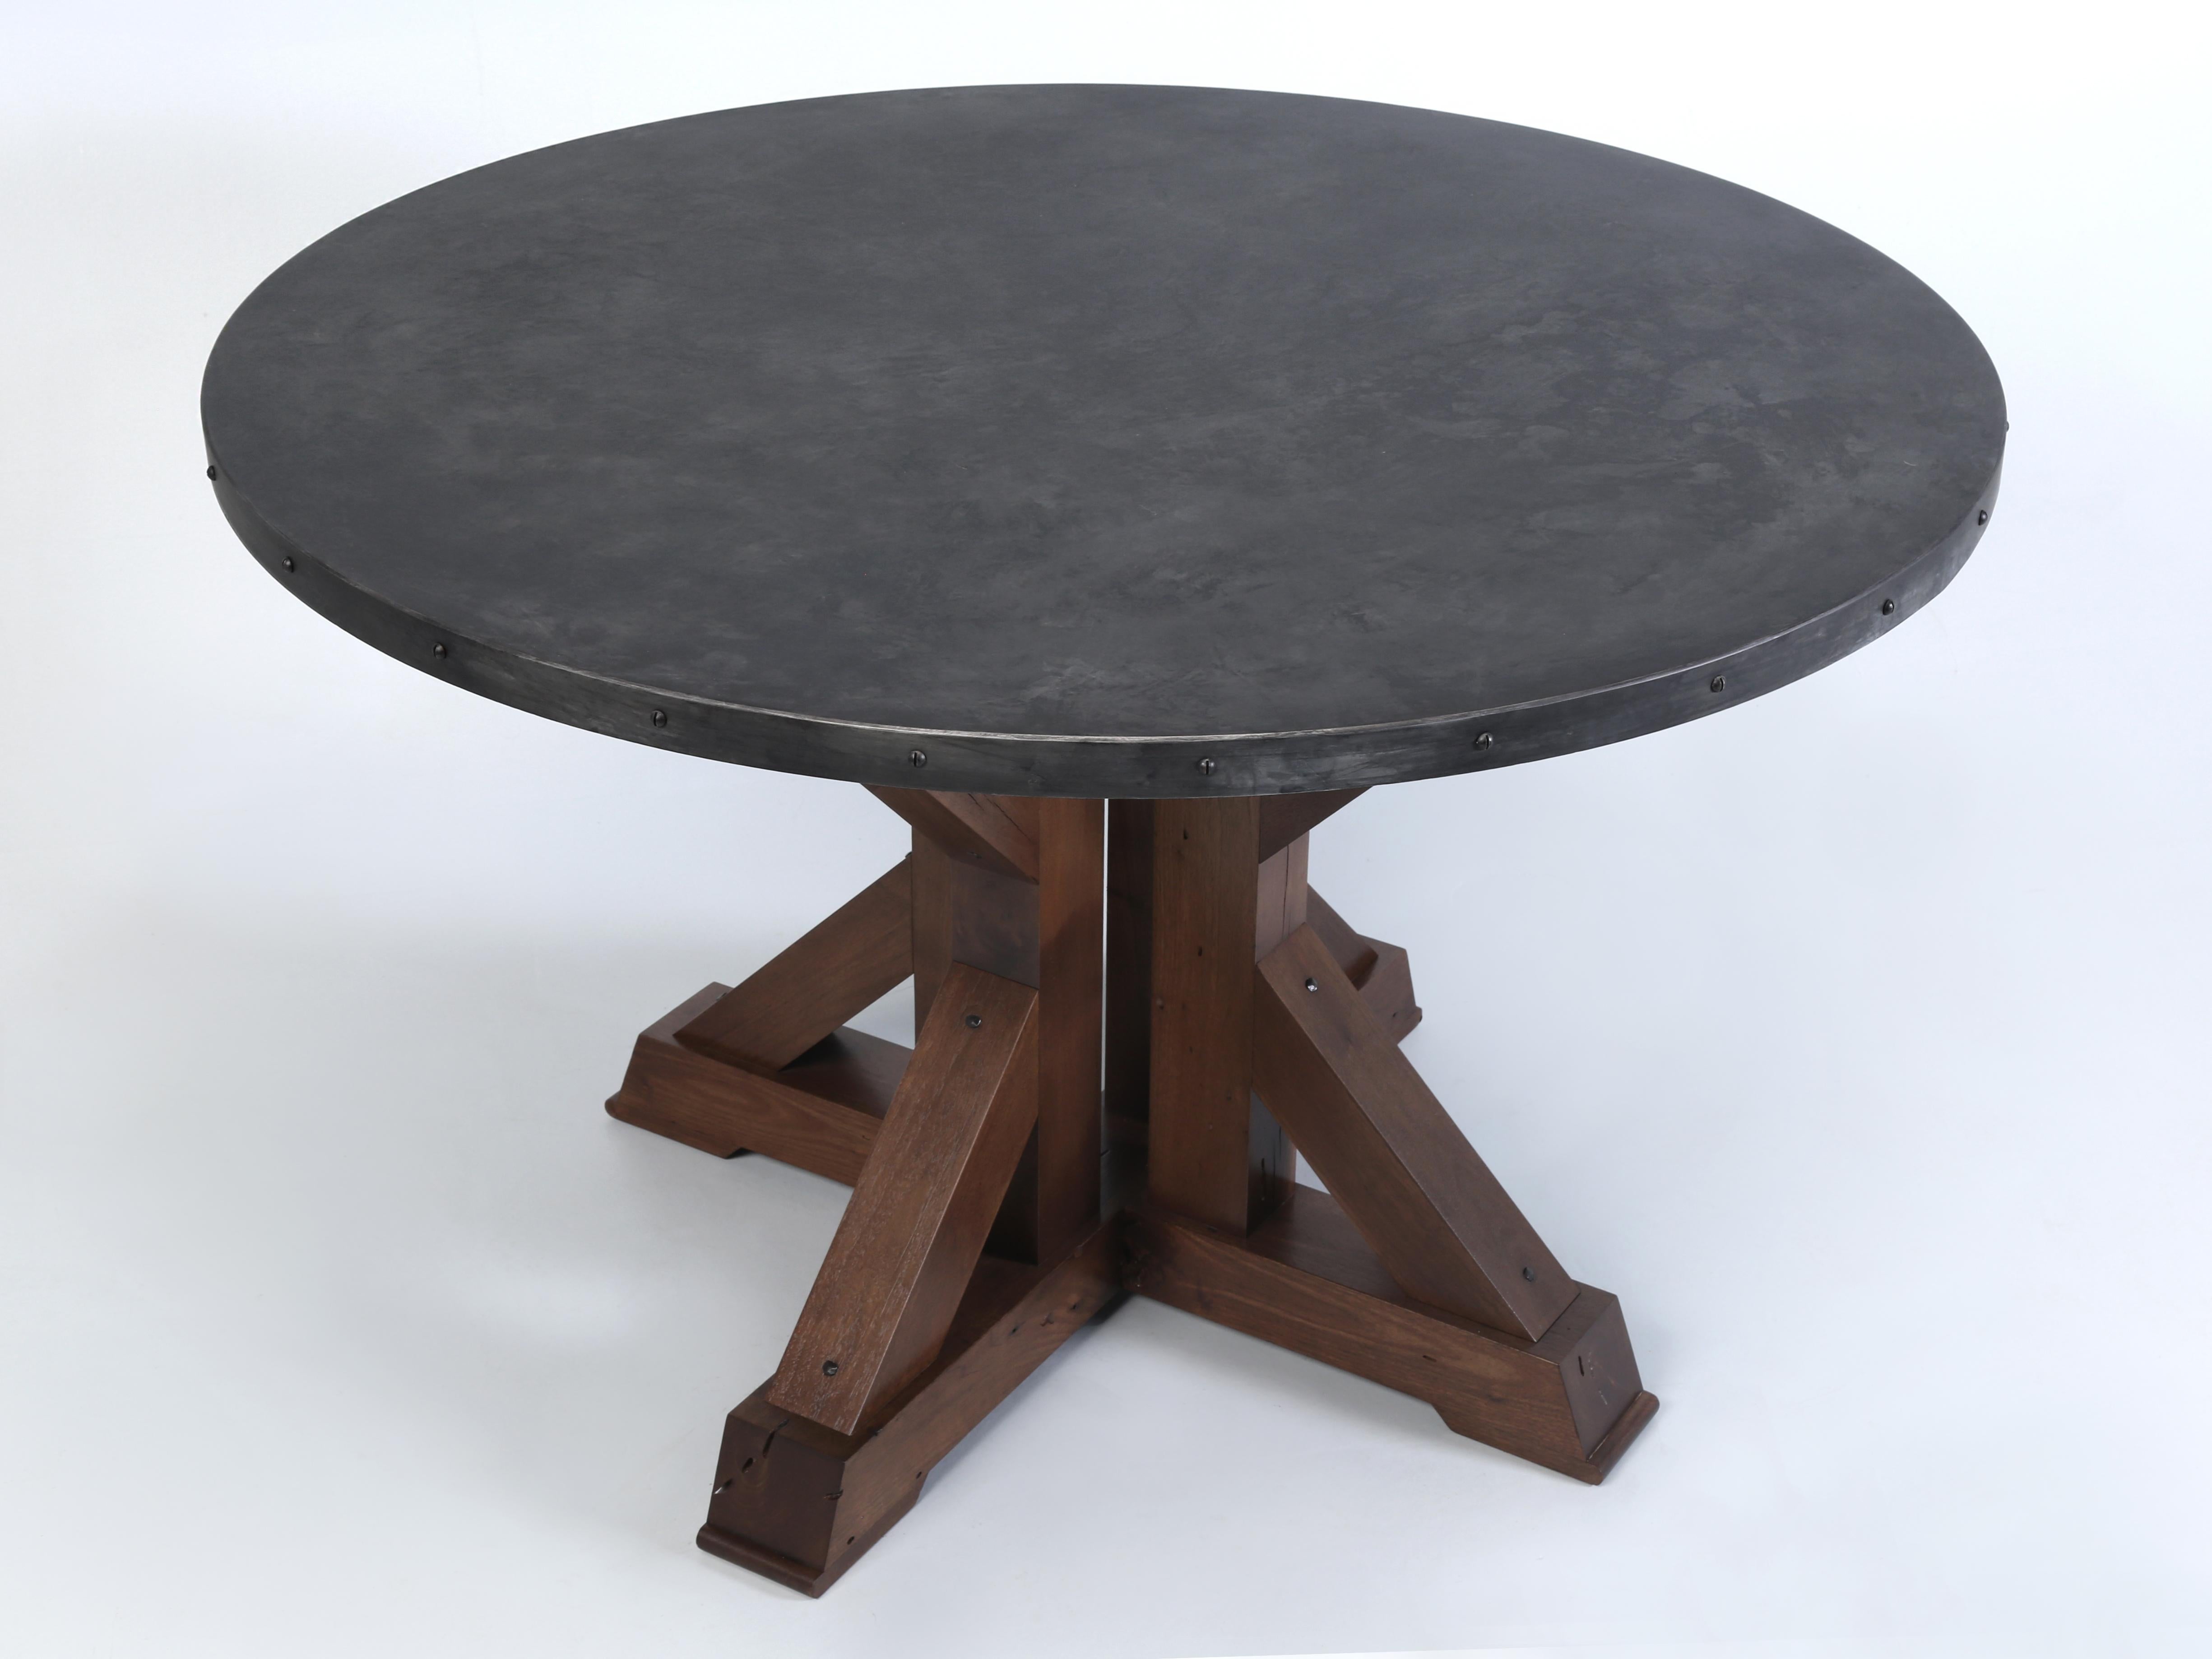 Custom Hand-Made in Chicago is our Country French Inspired Round Dining Table, or Kitchen Table built to order in Any Dimension. This particular Country French inspired Kitchen Table has a Zinc Top and a Solid Walnut Base. The Zinc top is specially